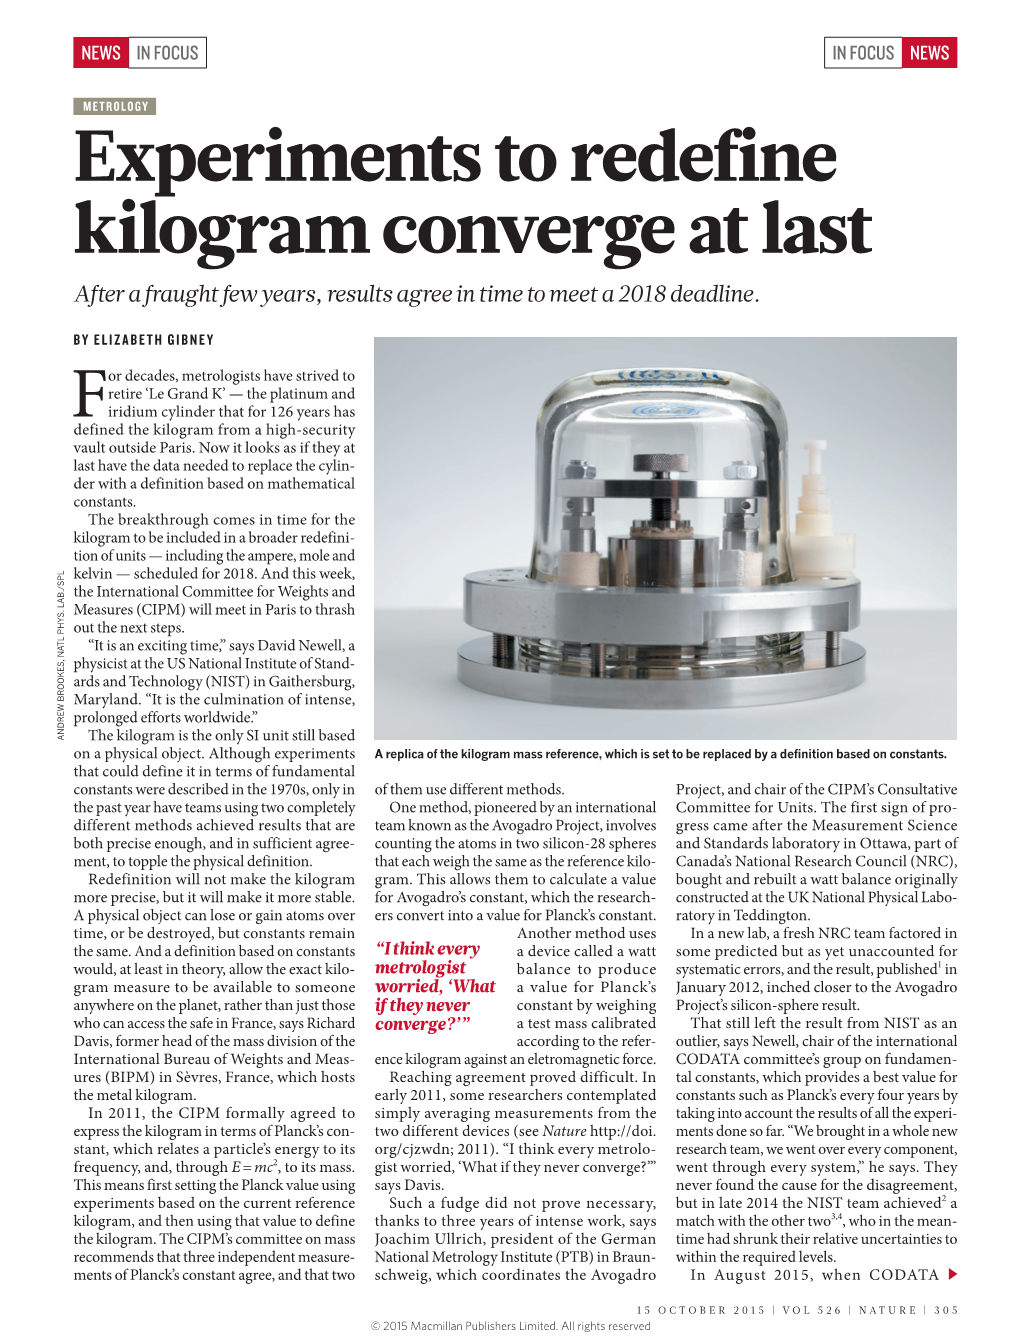 Experiments to Redefine Kilogram Converge at Last After a Fraught Few Years, Results Agree in Time to Meet a 2018 Deadline